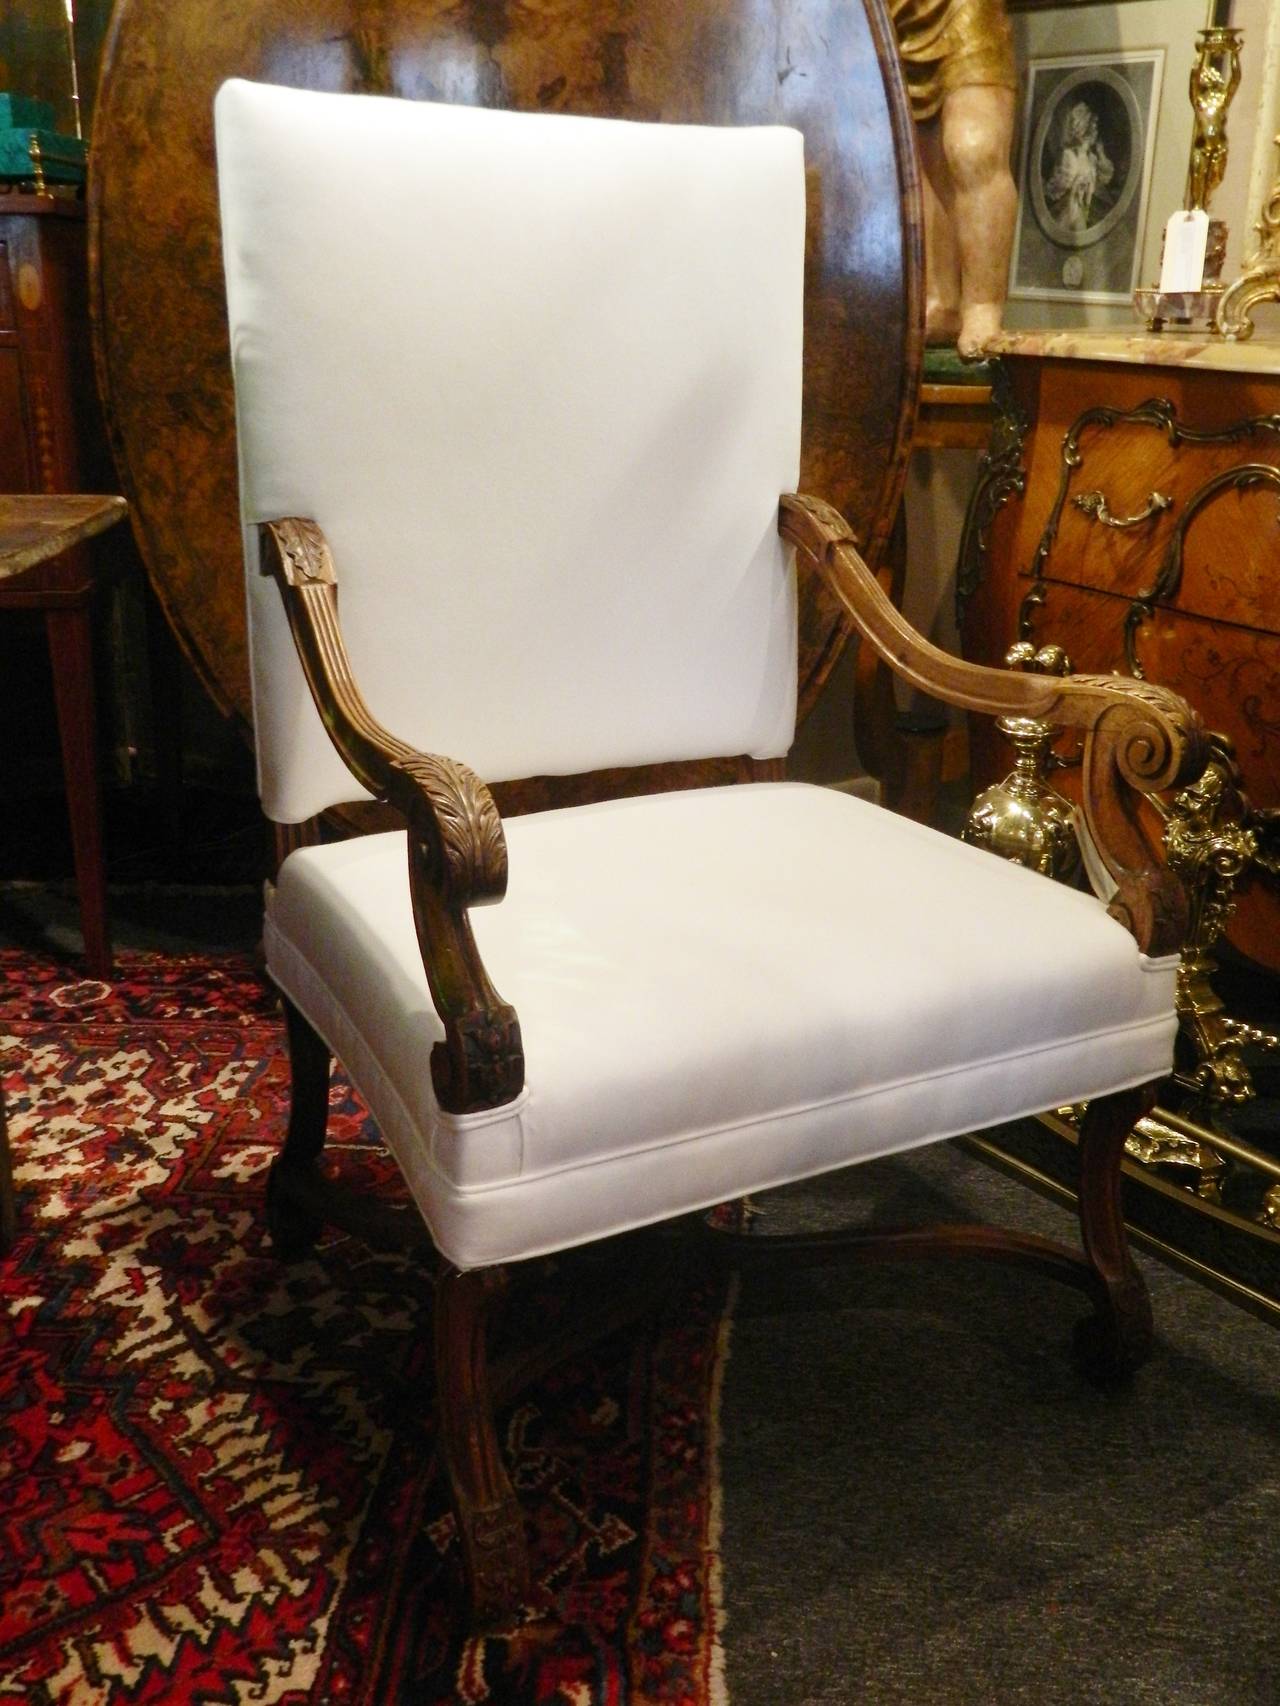 19th century French Provincial carved walnut armchair.